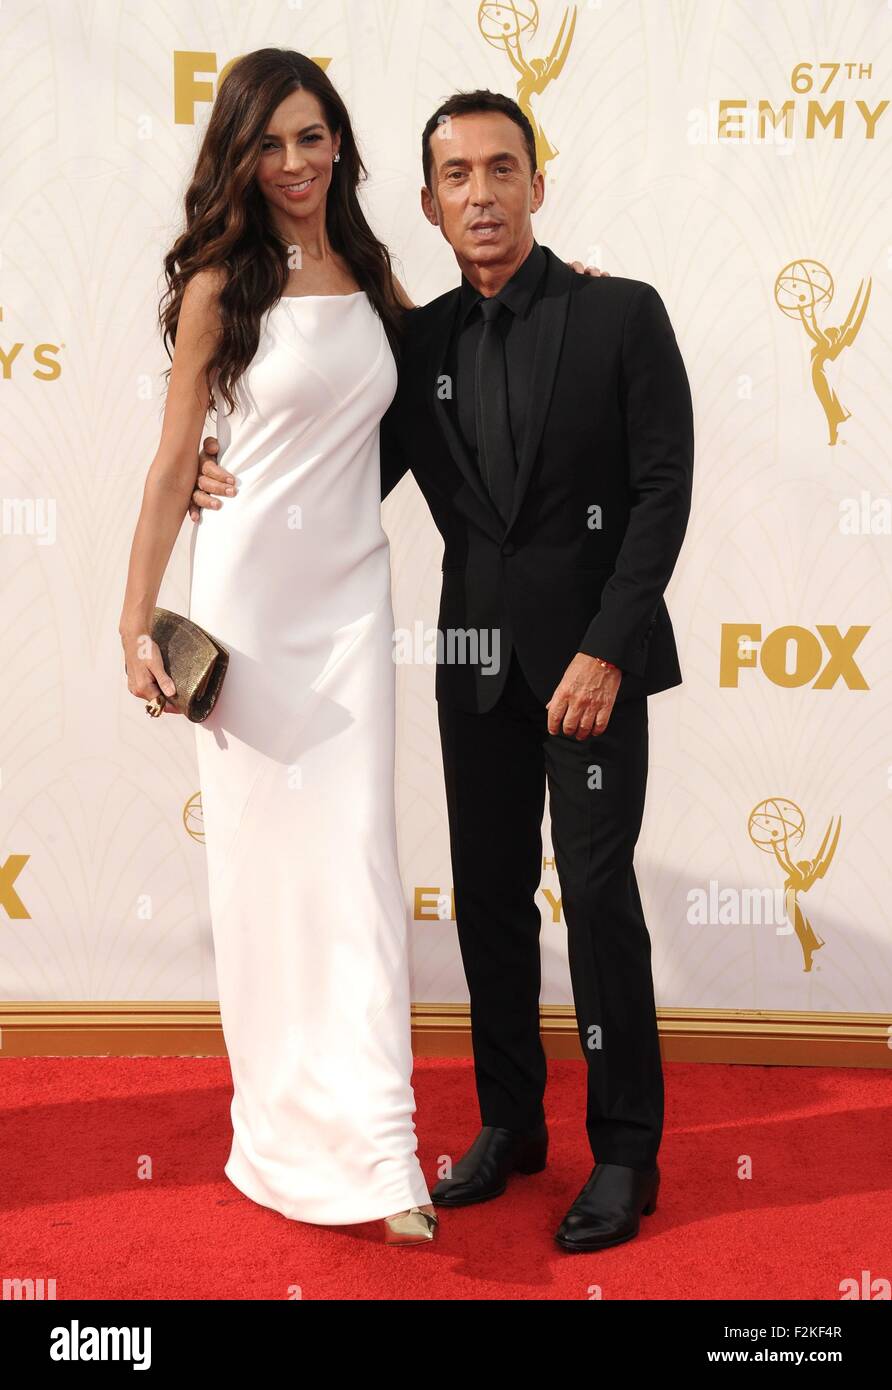 Los Angeles, CA, USA. 20th Sep, 2015. Terri Seymour, Bruno Tonioli at arrivals for 67th Primetime Emmy Awards 2015 - Arrivals 3, The Microsoft Theater (formerly Nokia Theatre L.A. Live), Los Angeles, CA September 20, 2015. Credit:  Dee Cercone/Everett Collection/Alamy Live News Stock Photo